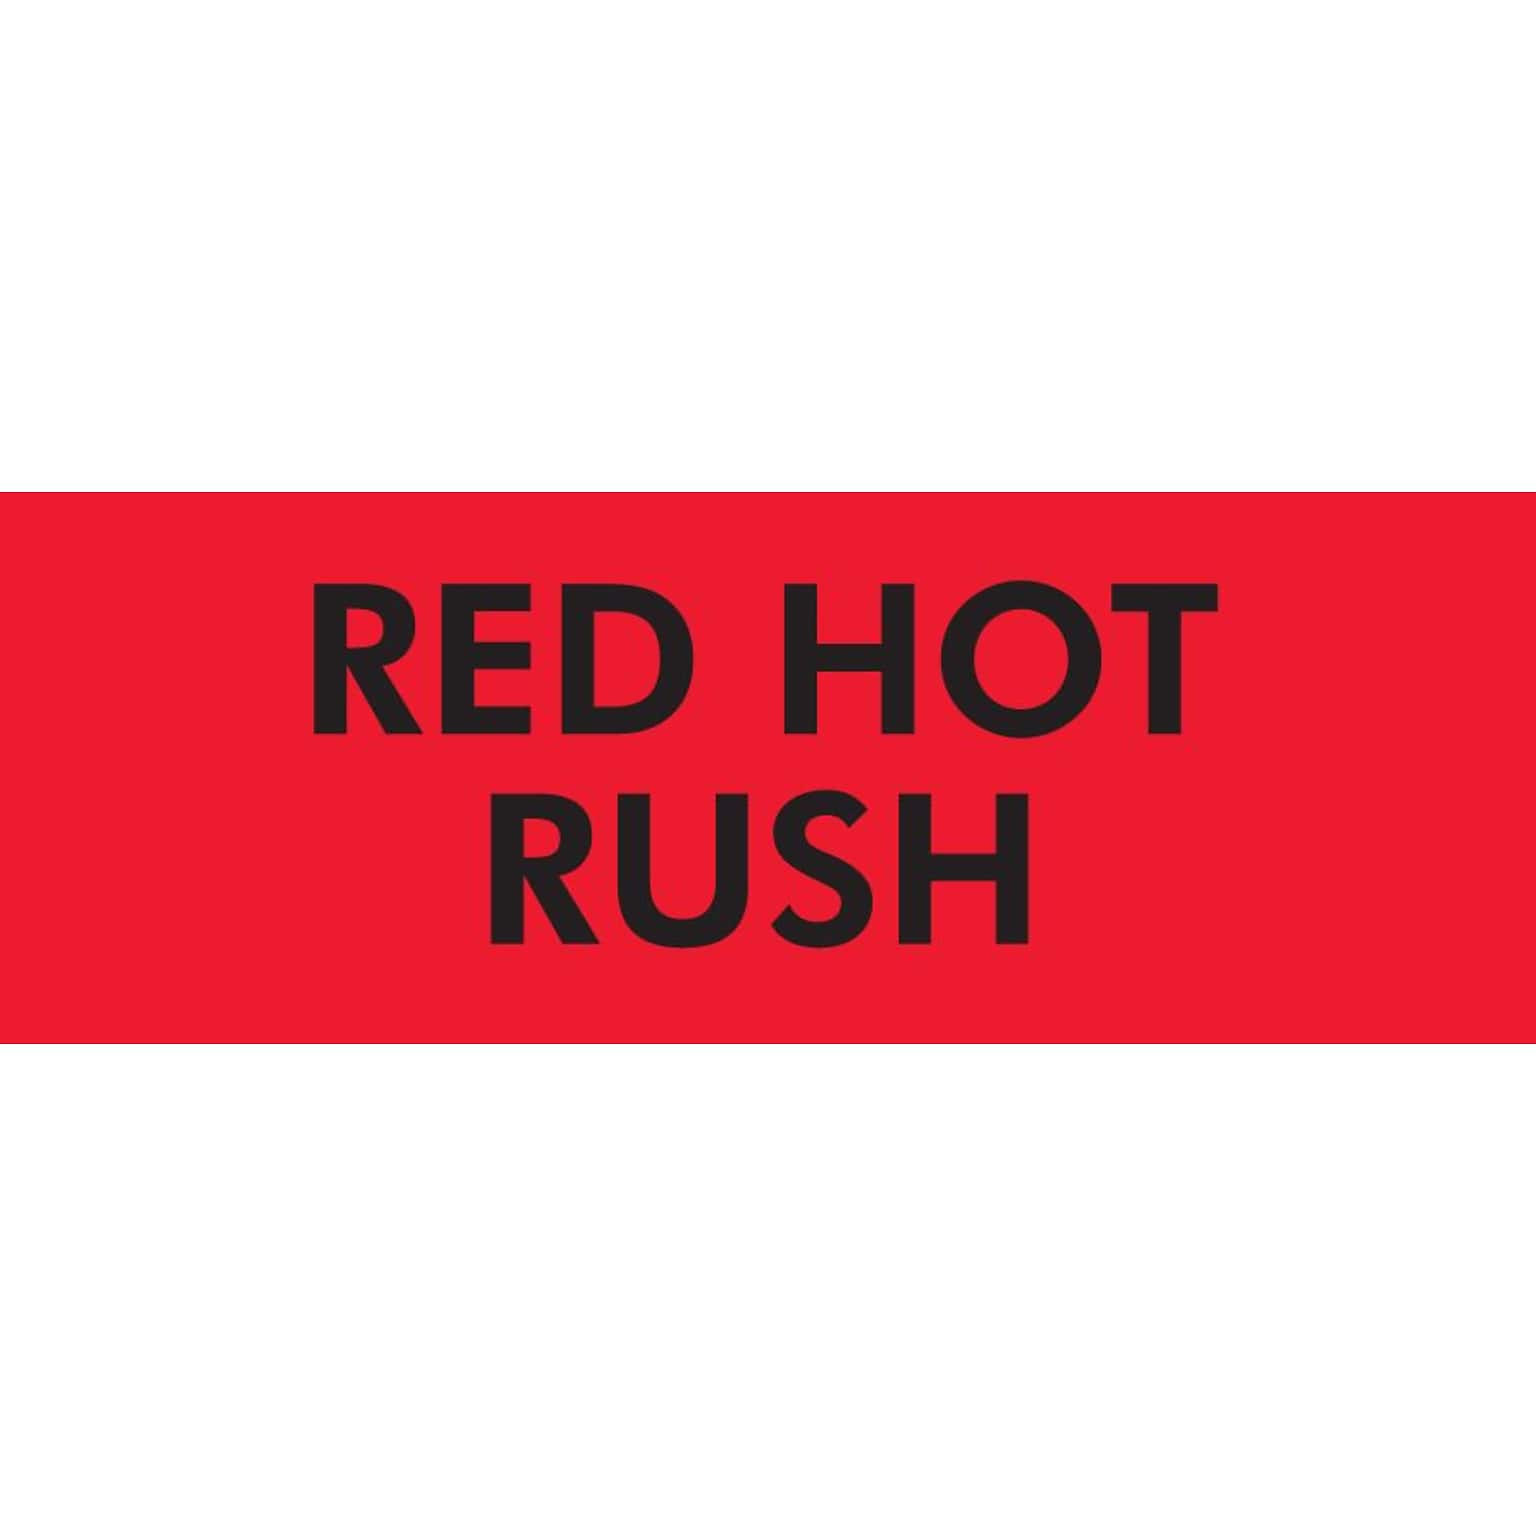 Quill Brand® Red Hot Rush Labels, Red/Black, 3 x 2, 500/Rl